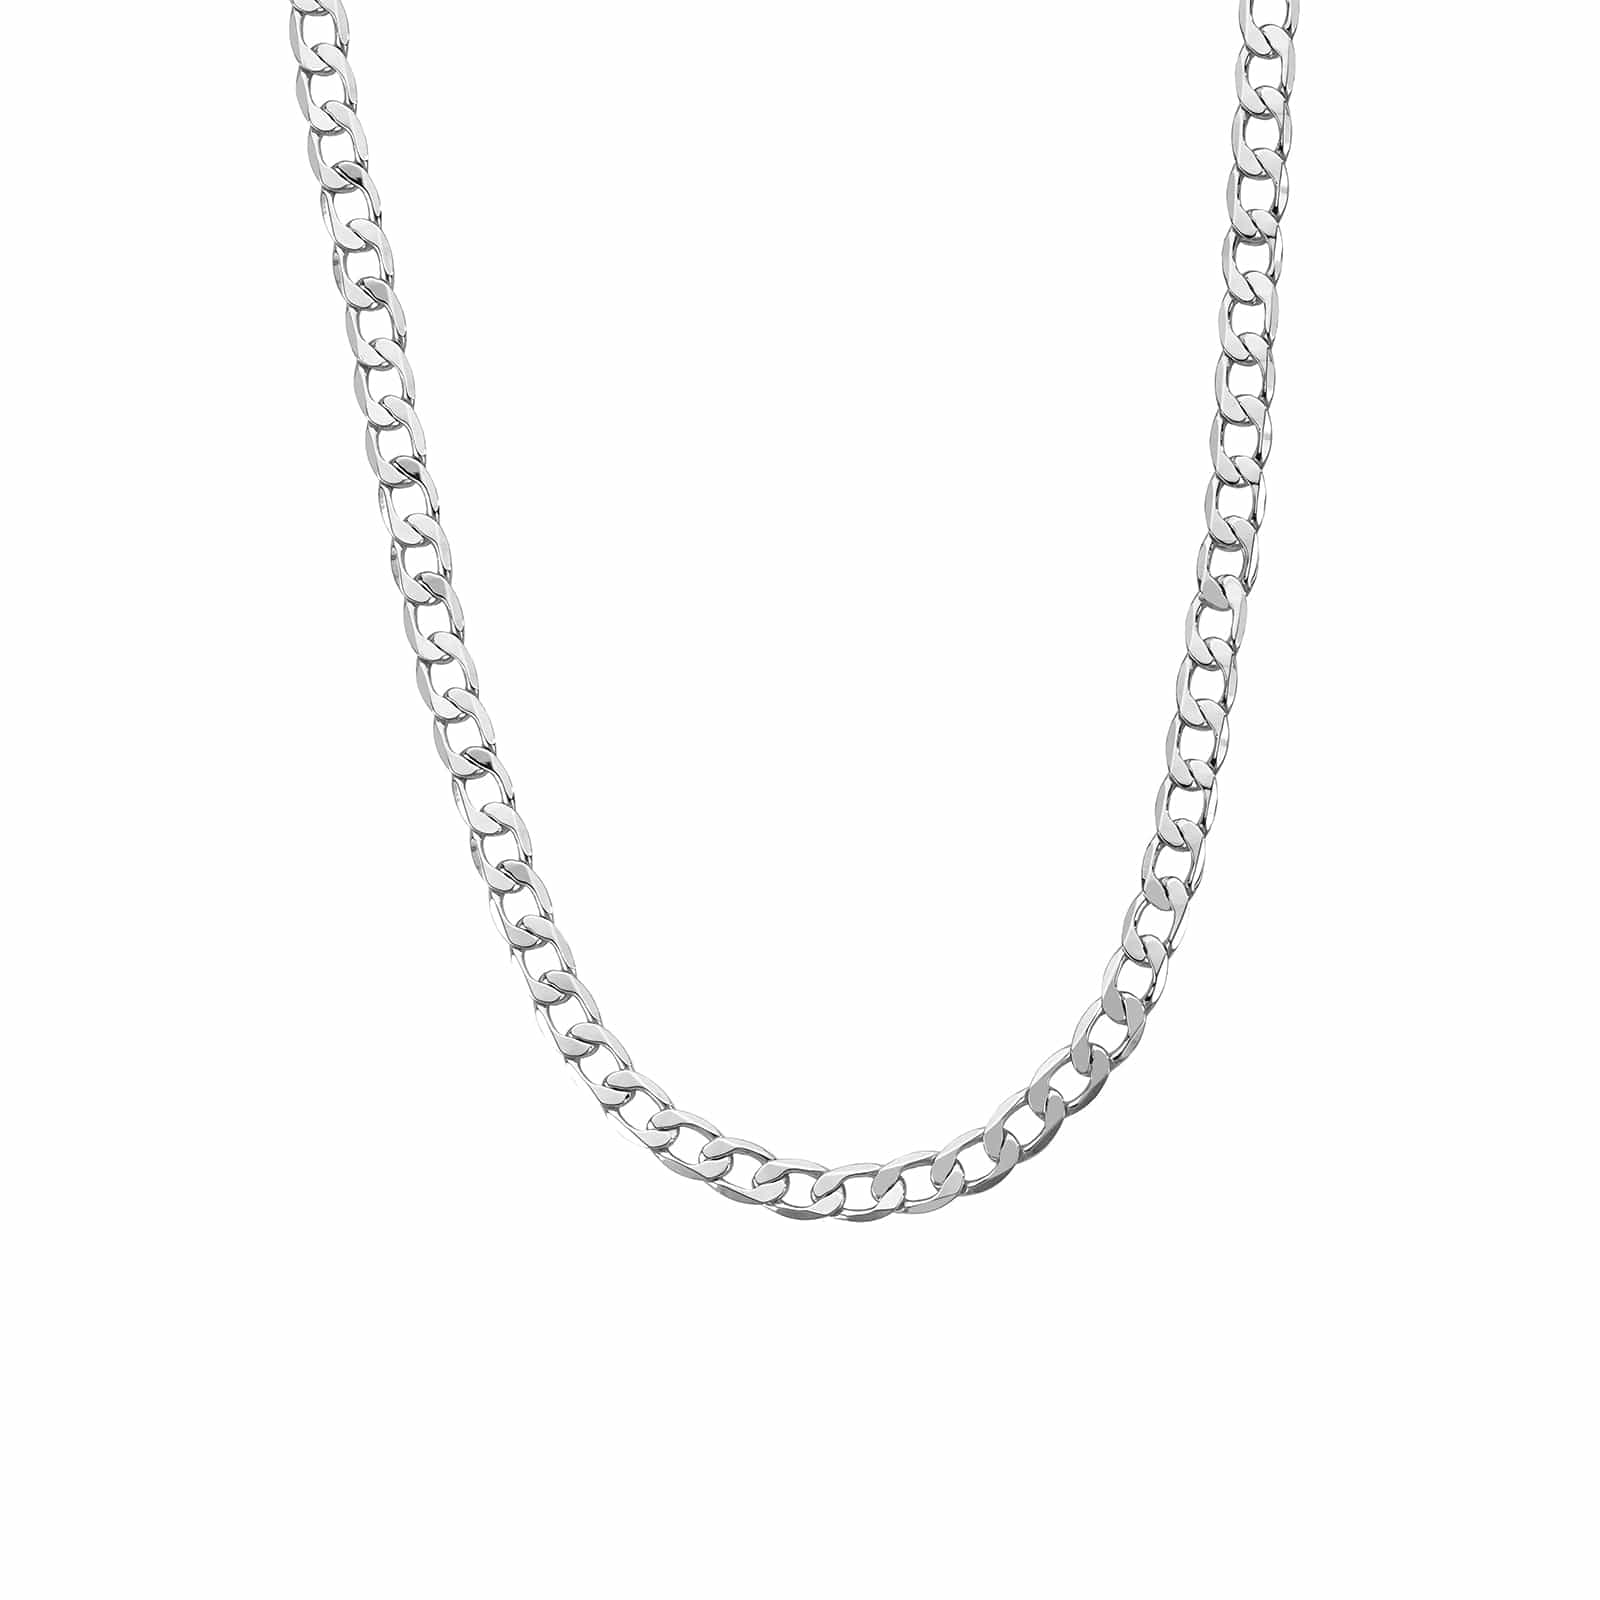 Gold Dipped Chains Curb Chain 6mm - White Gold